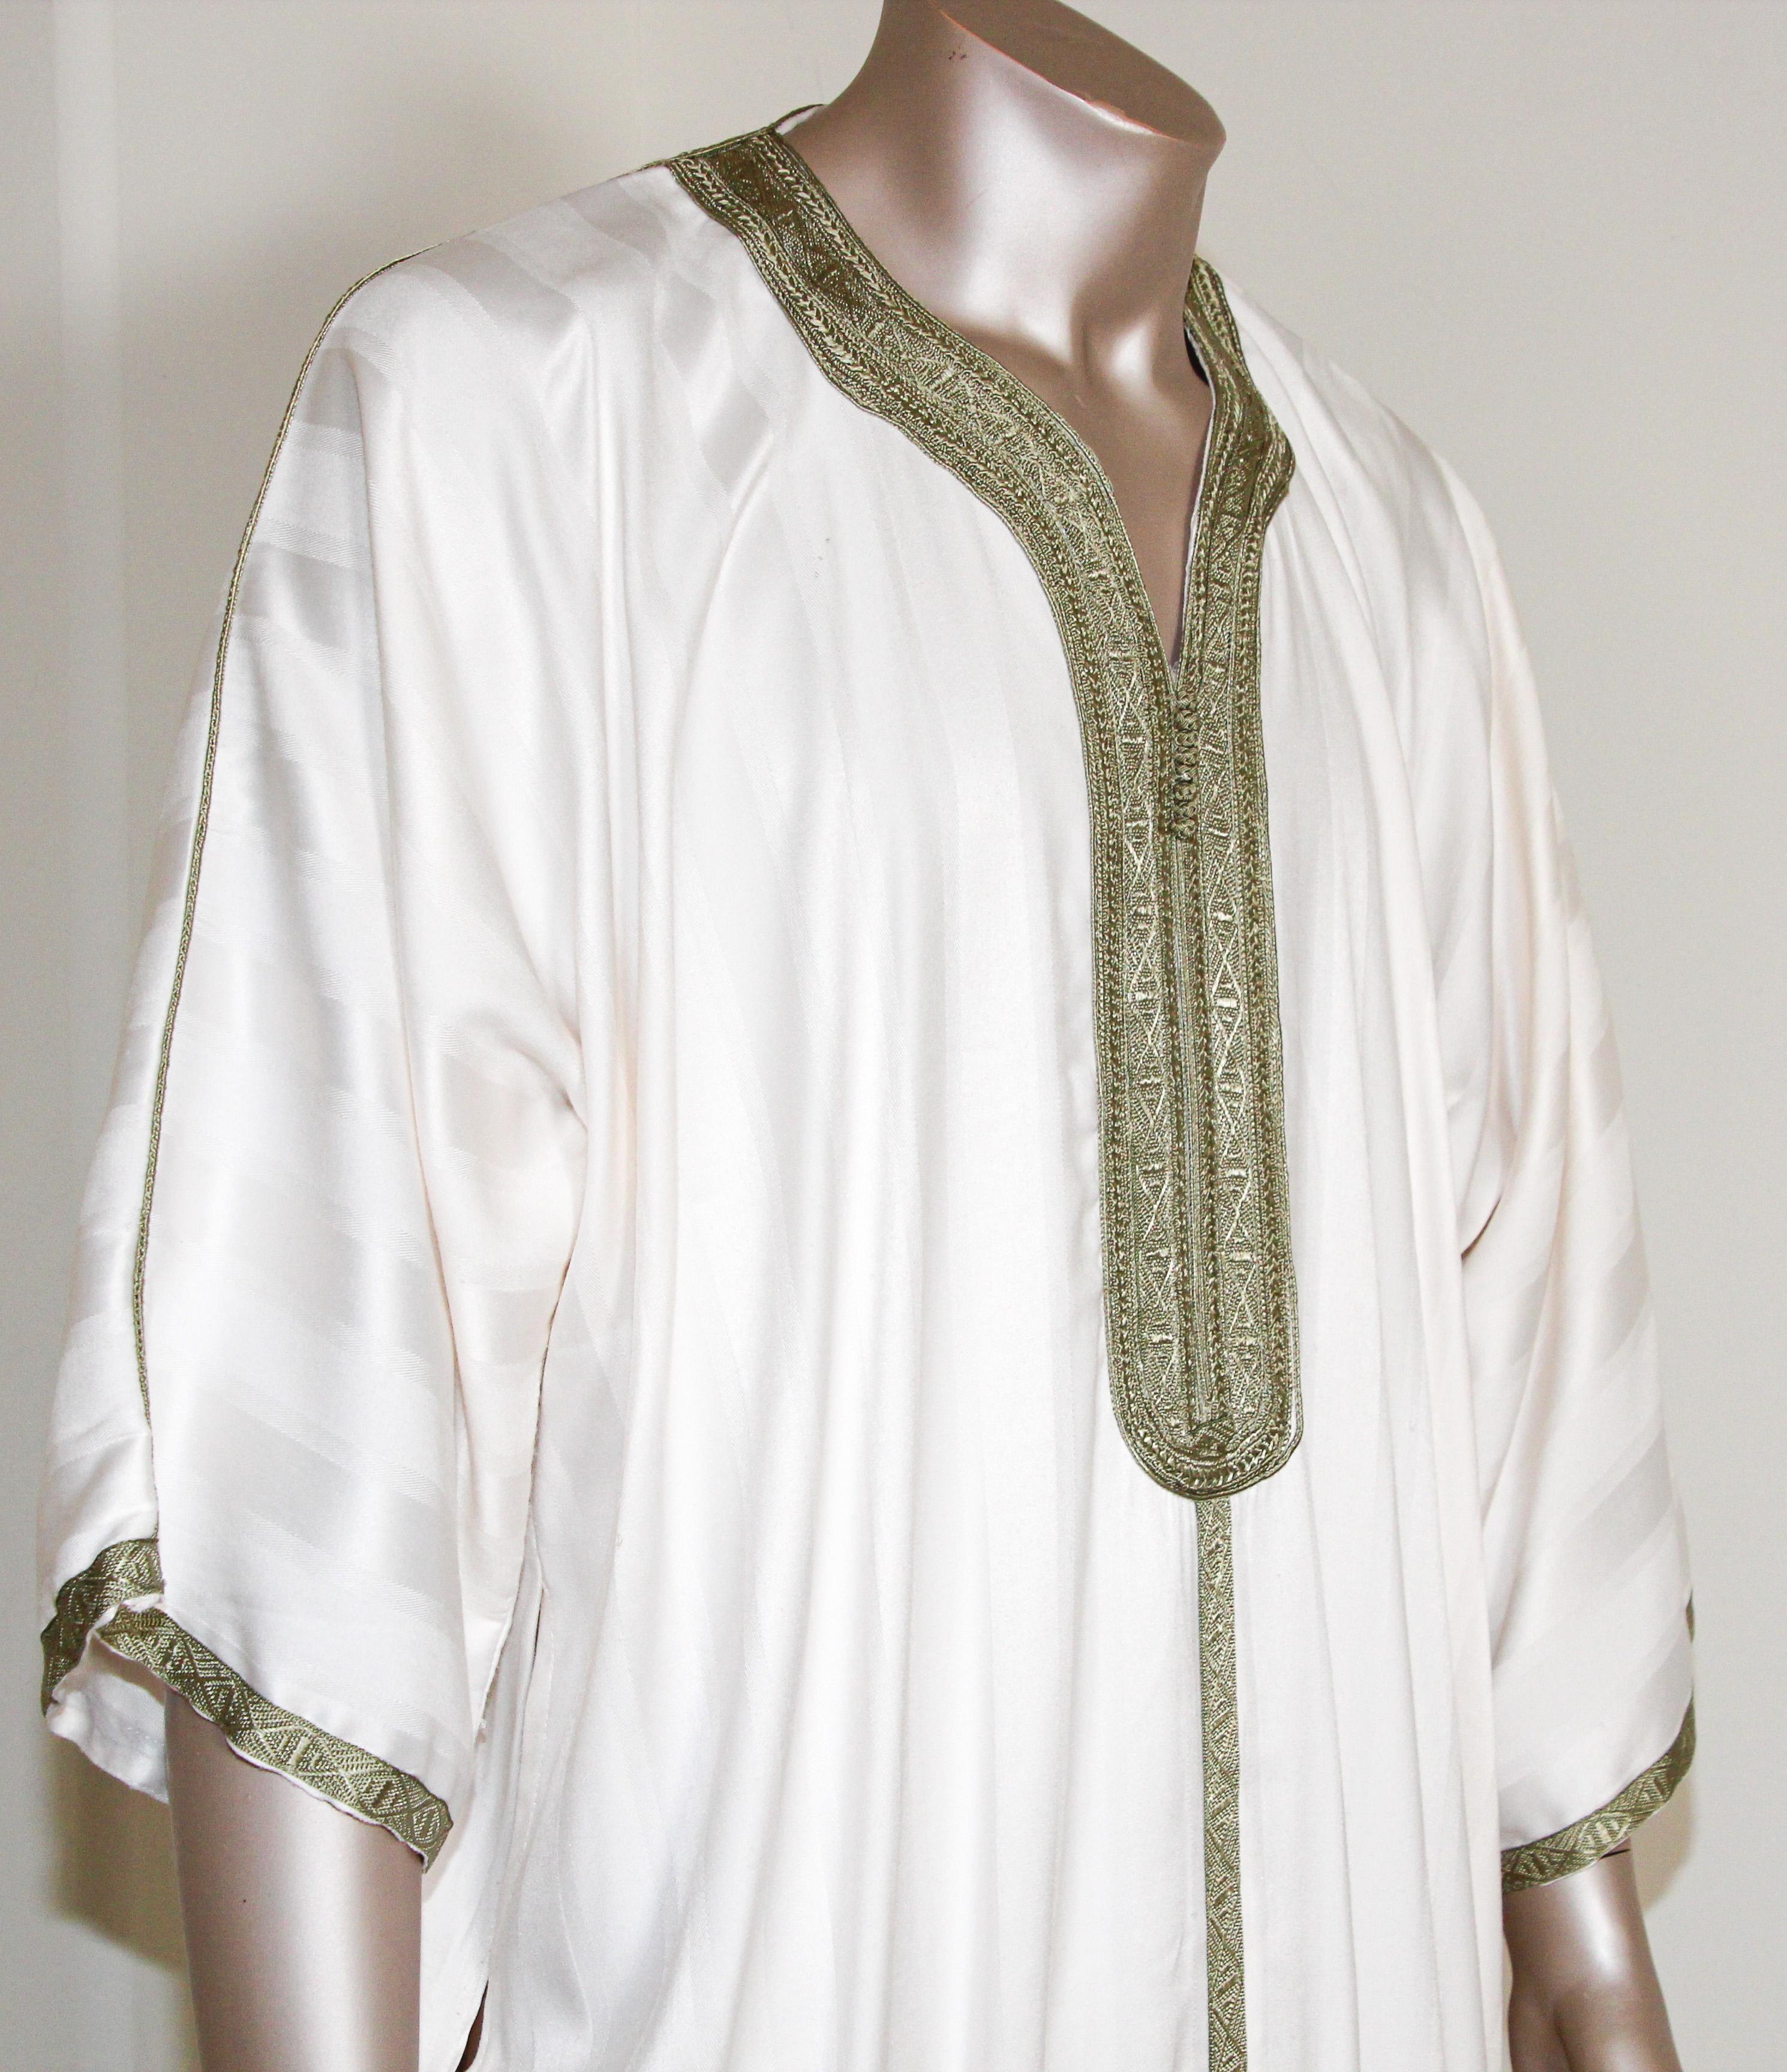 Moroccan Vintage Gentleman Caftan White with Green Trim In Good Condition For Sale In North Hollywood, CA